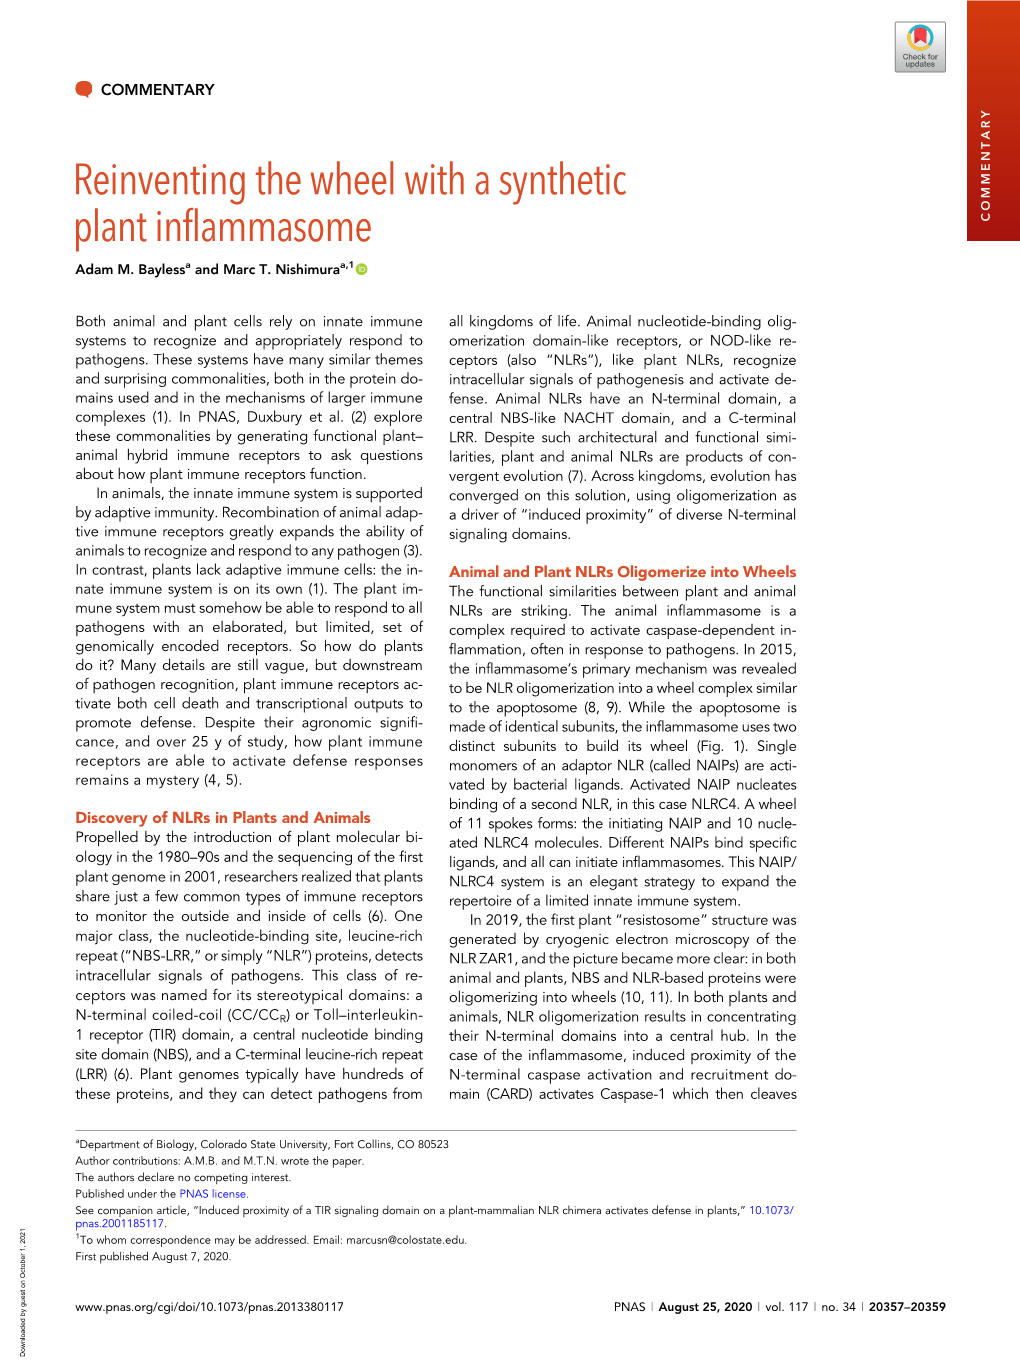 Reinventing the Wheel with a Synthetic Plant Inflammasome COMMENTARY Adam M